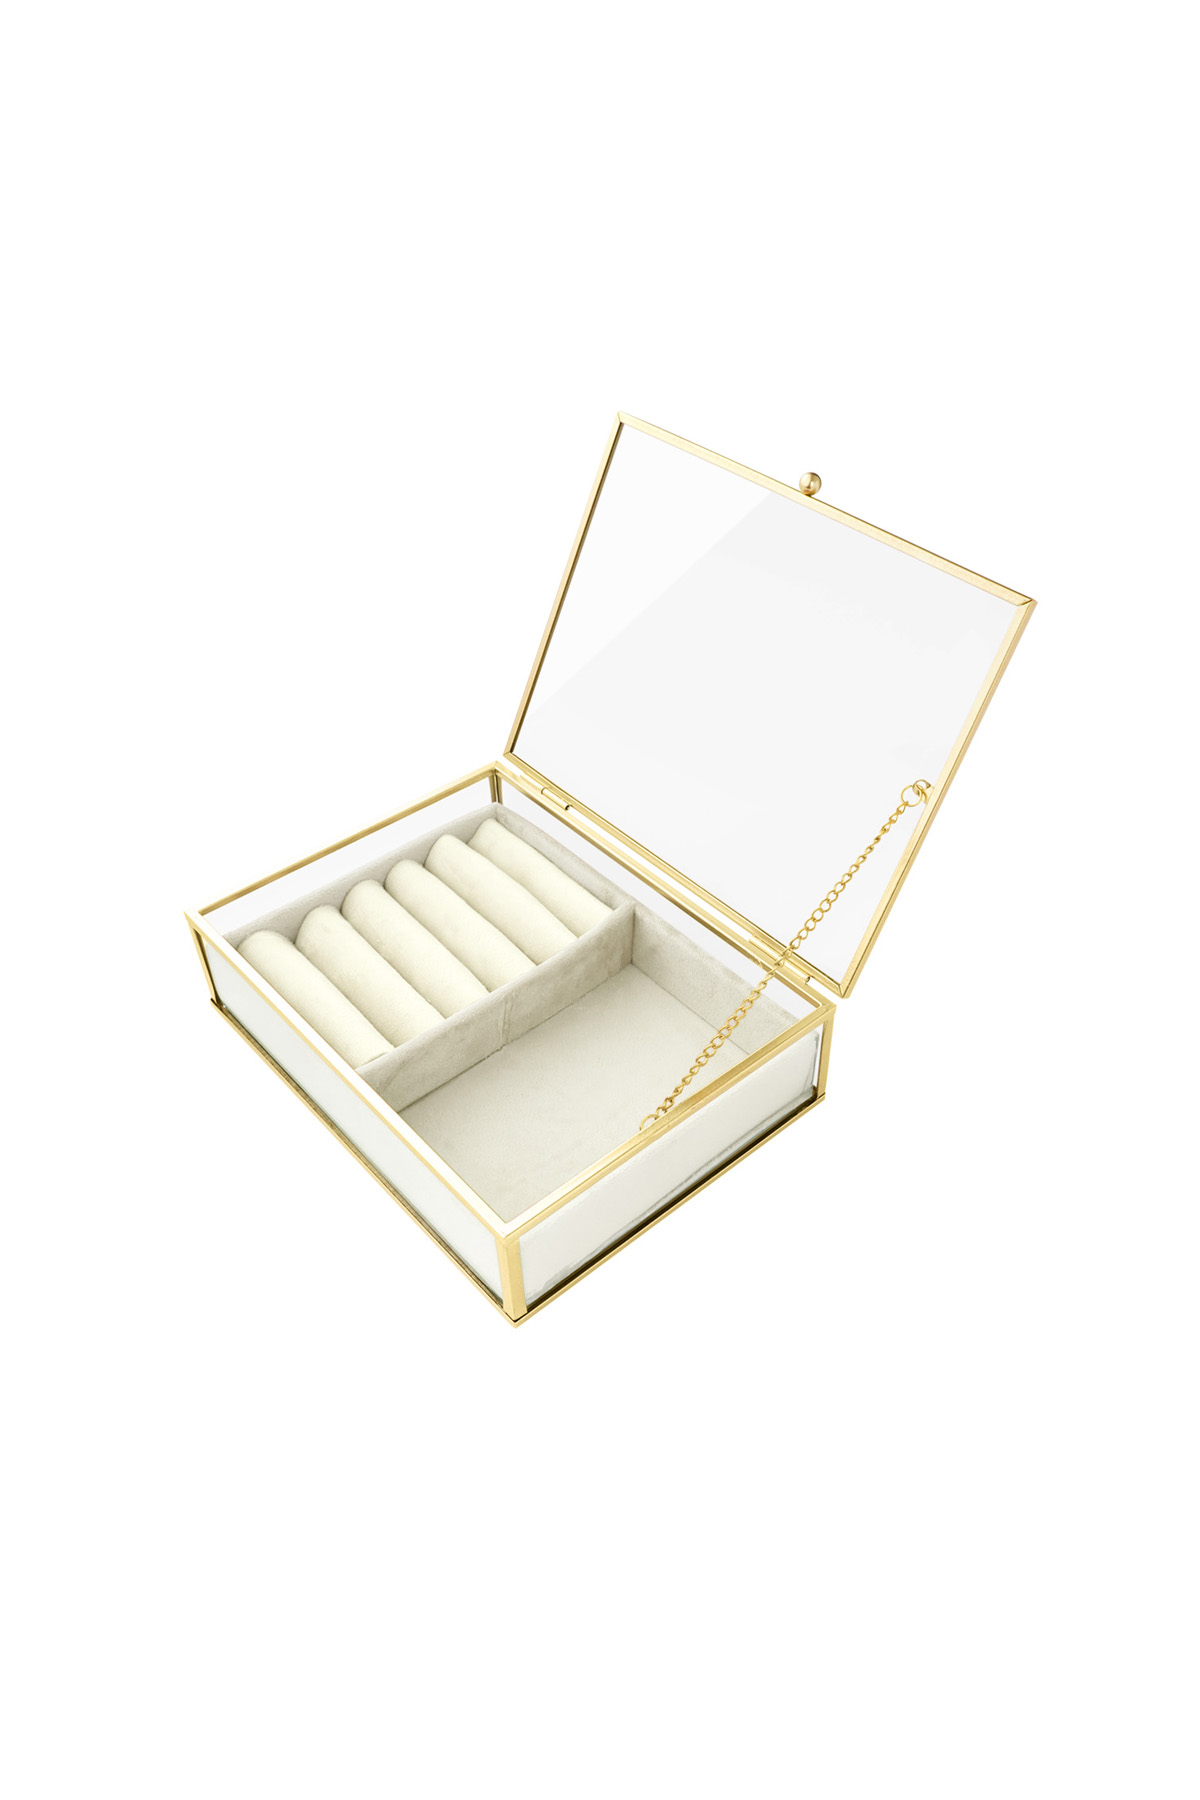 Glass two-compartment display - white